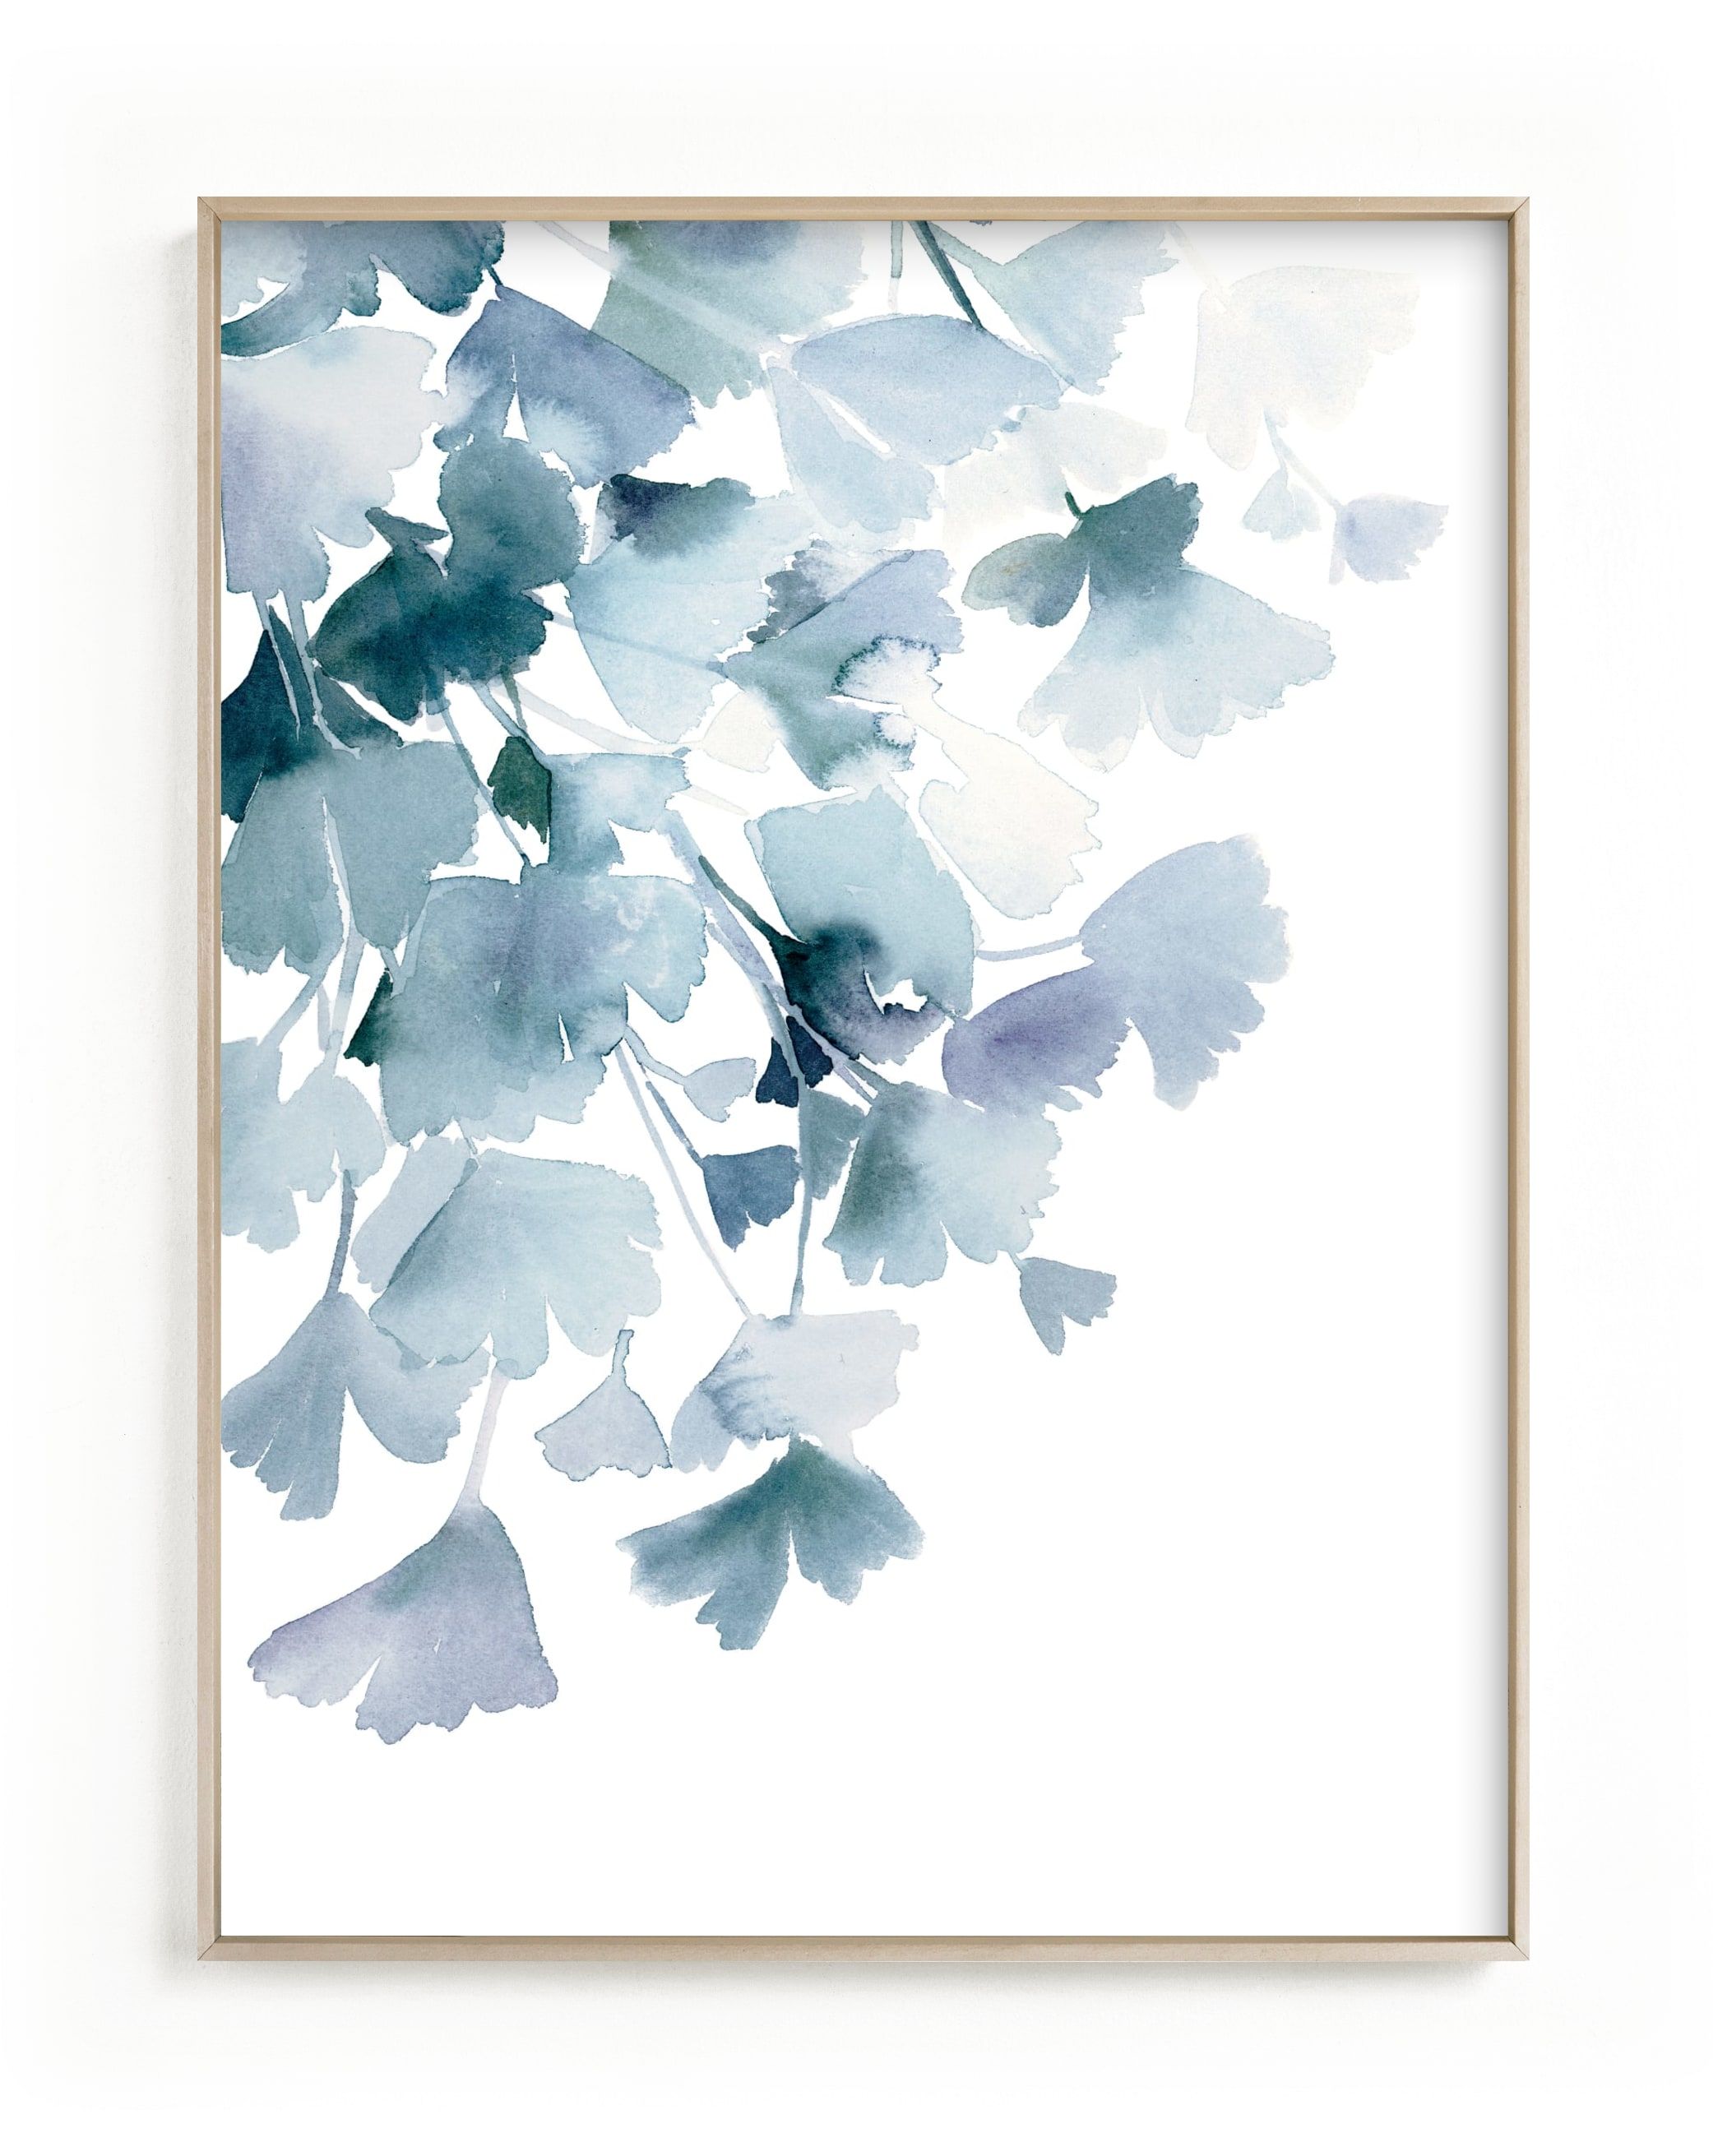 "Blue Ginkgo" - Painting Limited Edition Art Print by Yao Cheng Design. | Minted